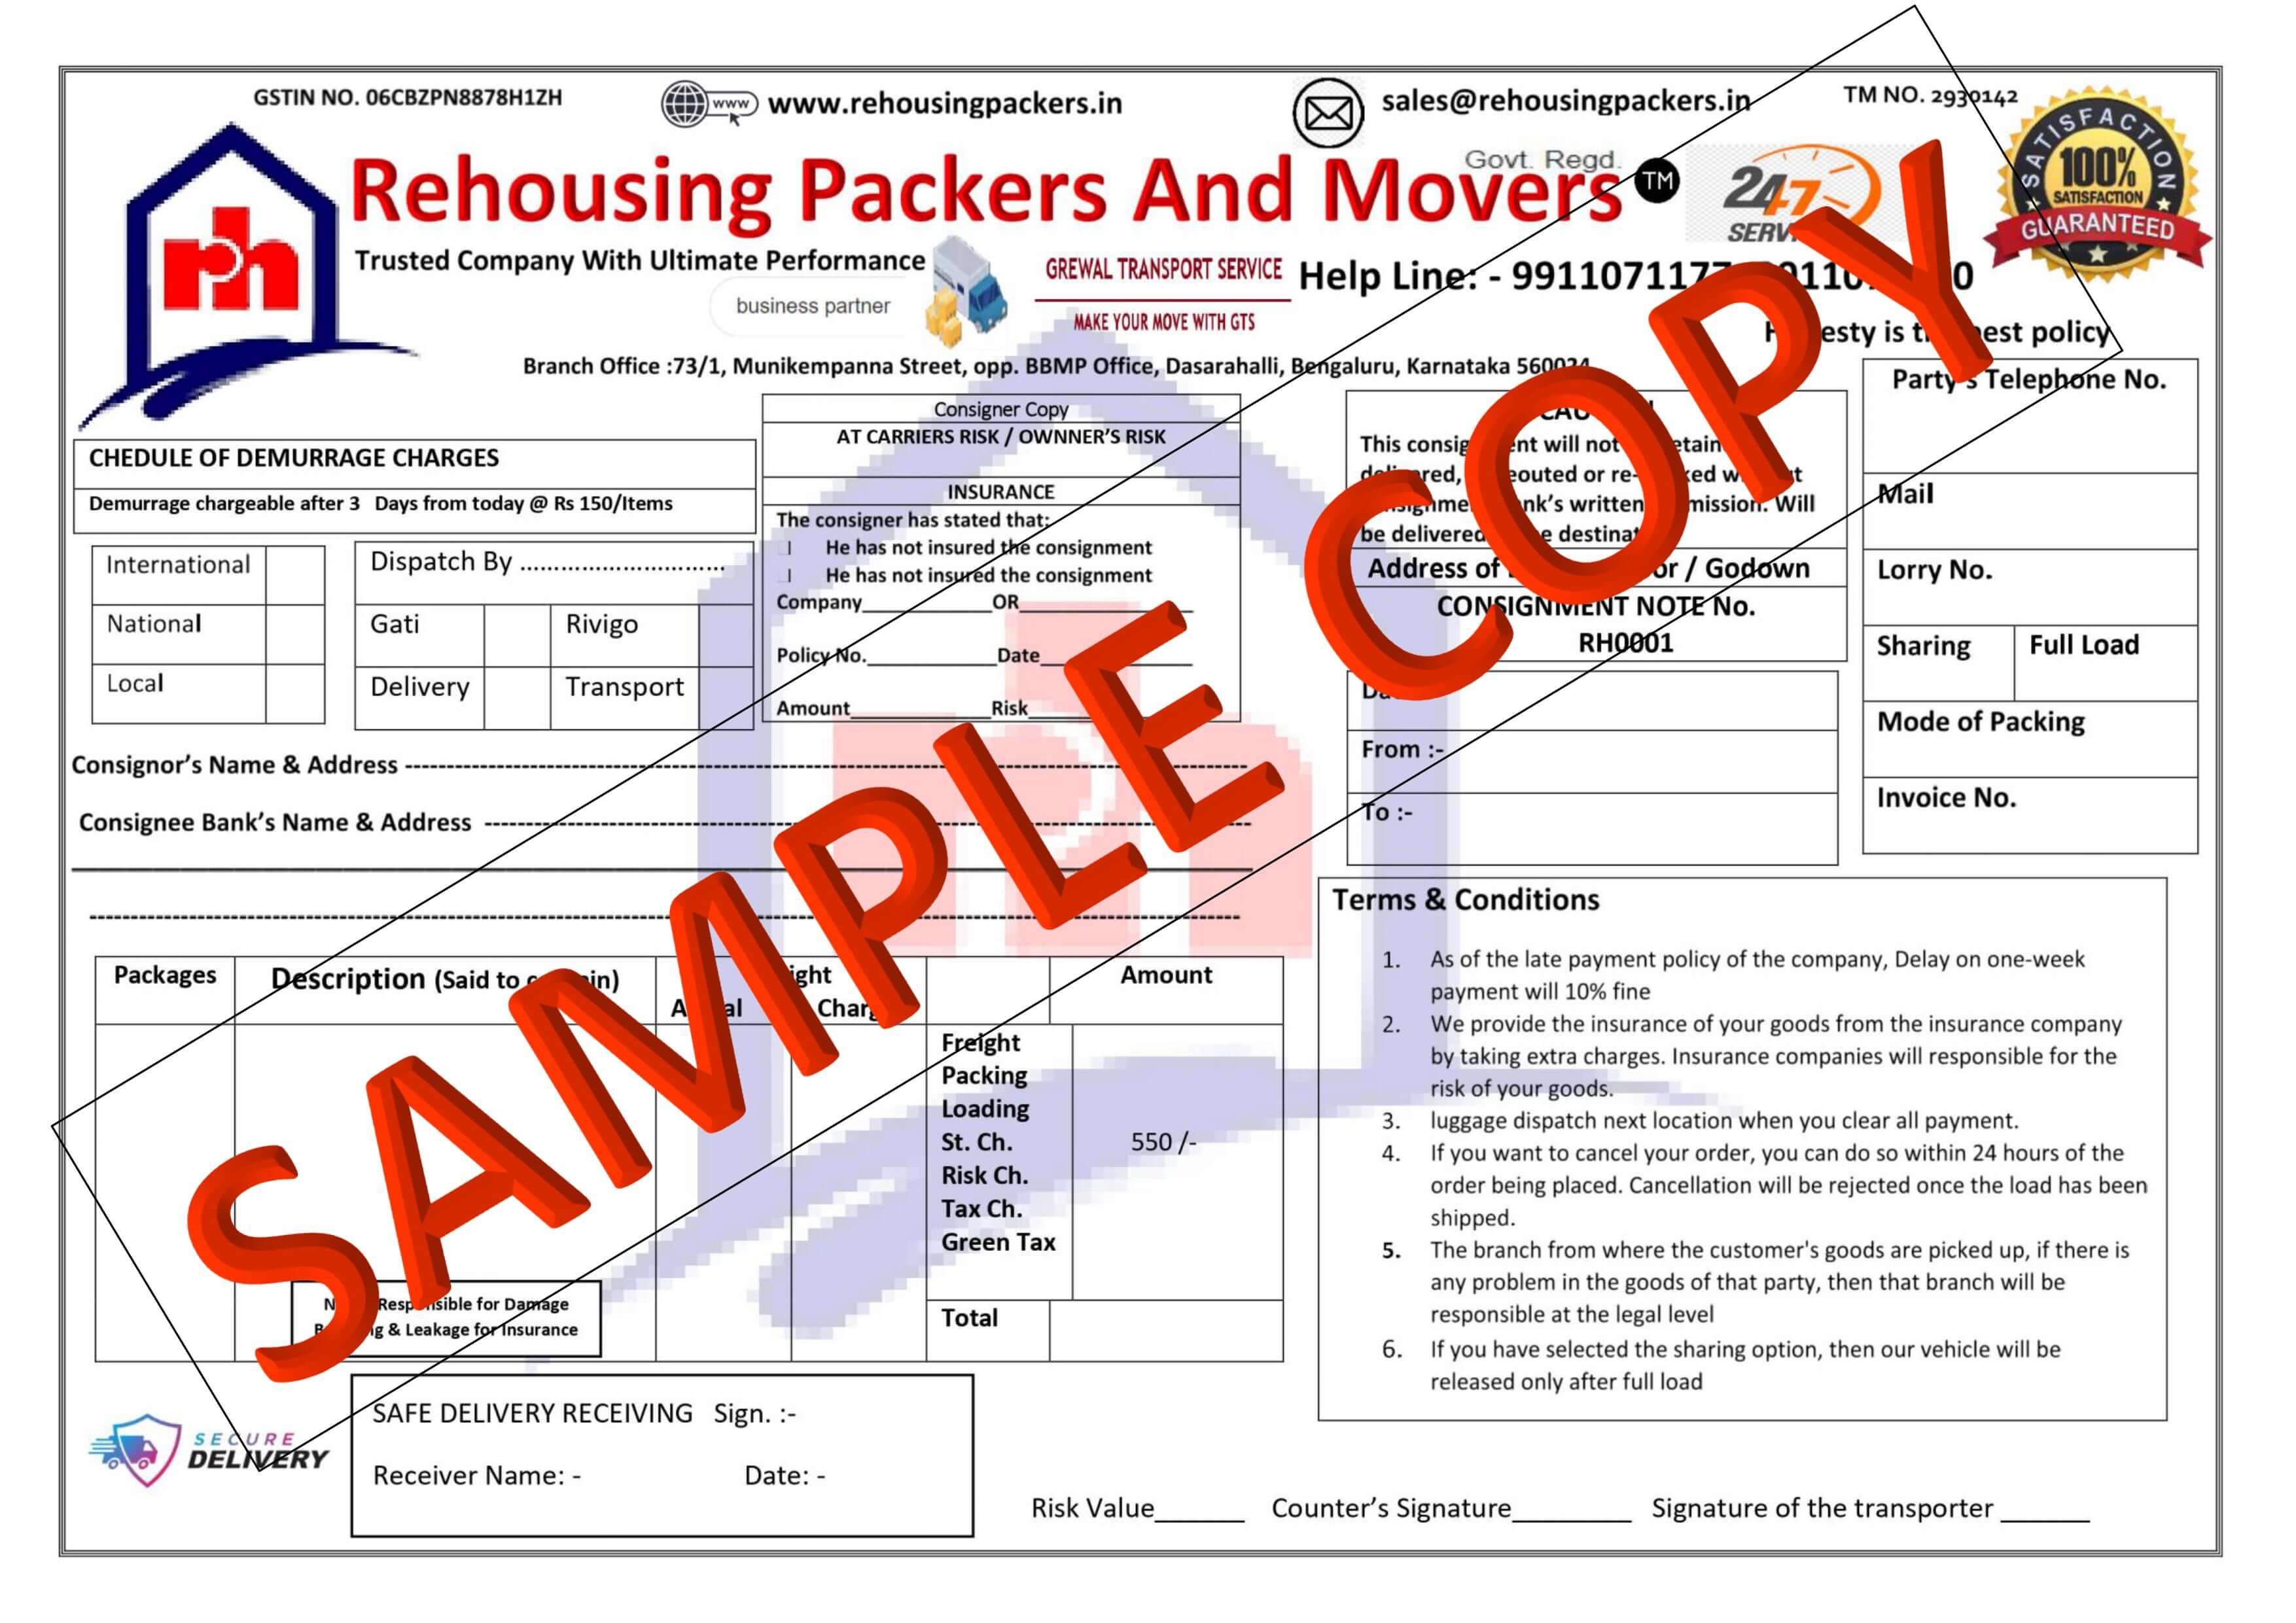 Identifying Fake Packers and Movers GST Invoice - Tips and Warning Signs